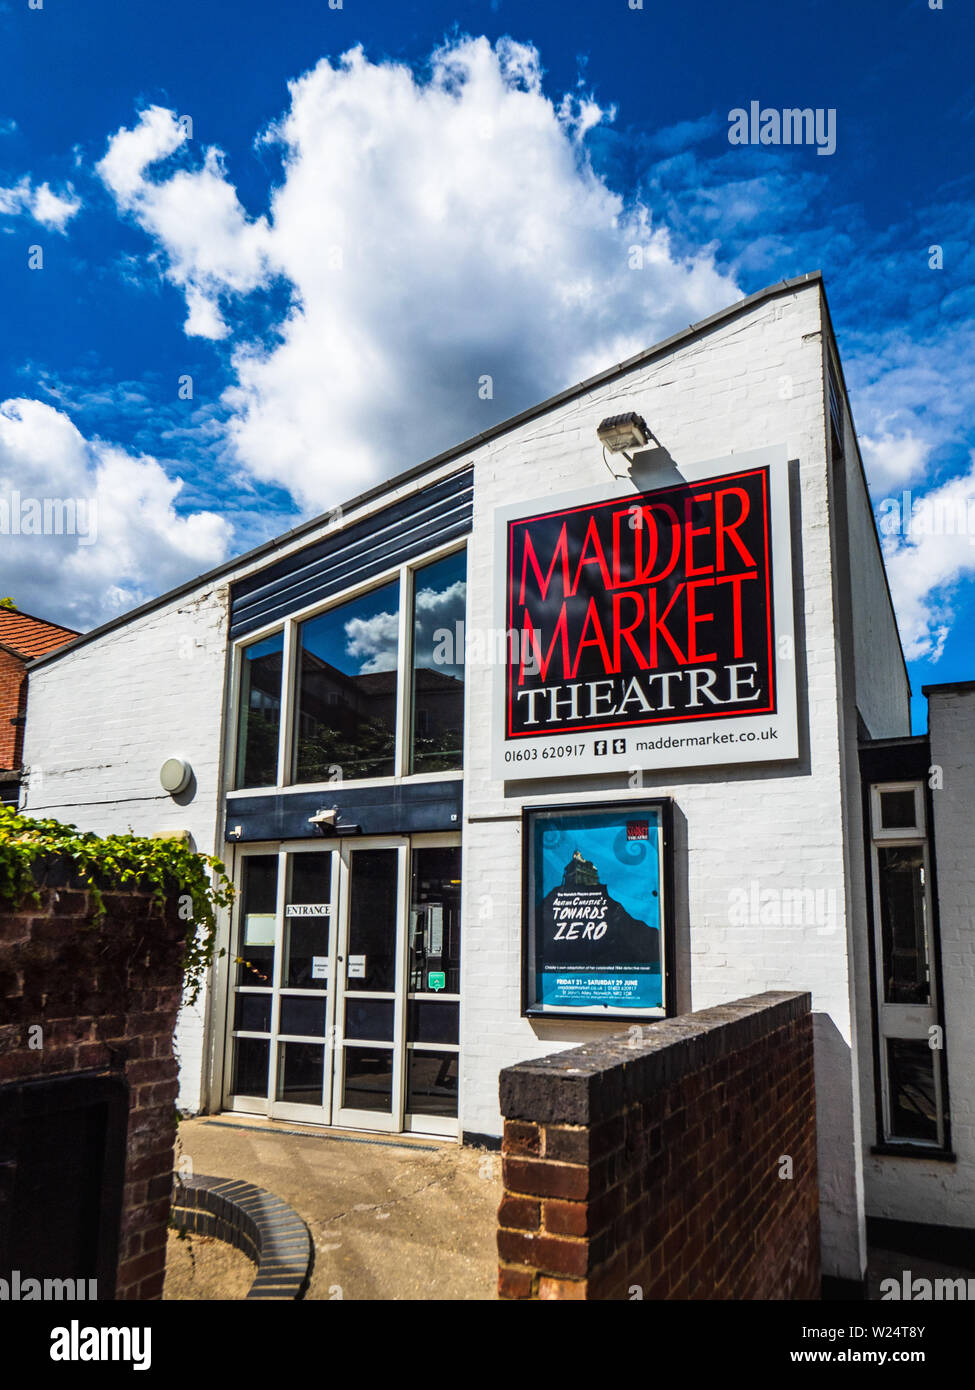 MadderMarket Theatre in St John's Alley in Central Norwich. Founded in 1921 as an Elizabethan style theatre by theatre director Nugent Monck Stock Photo